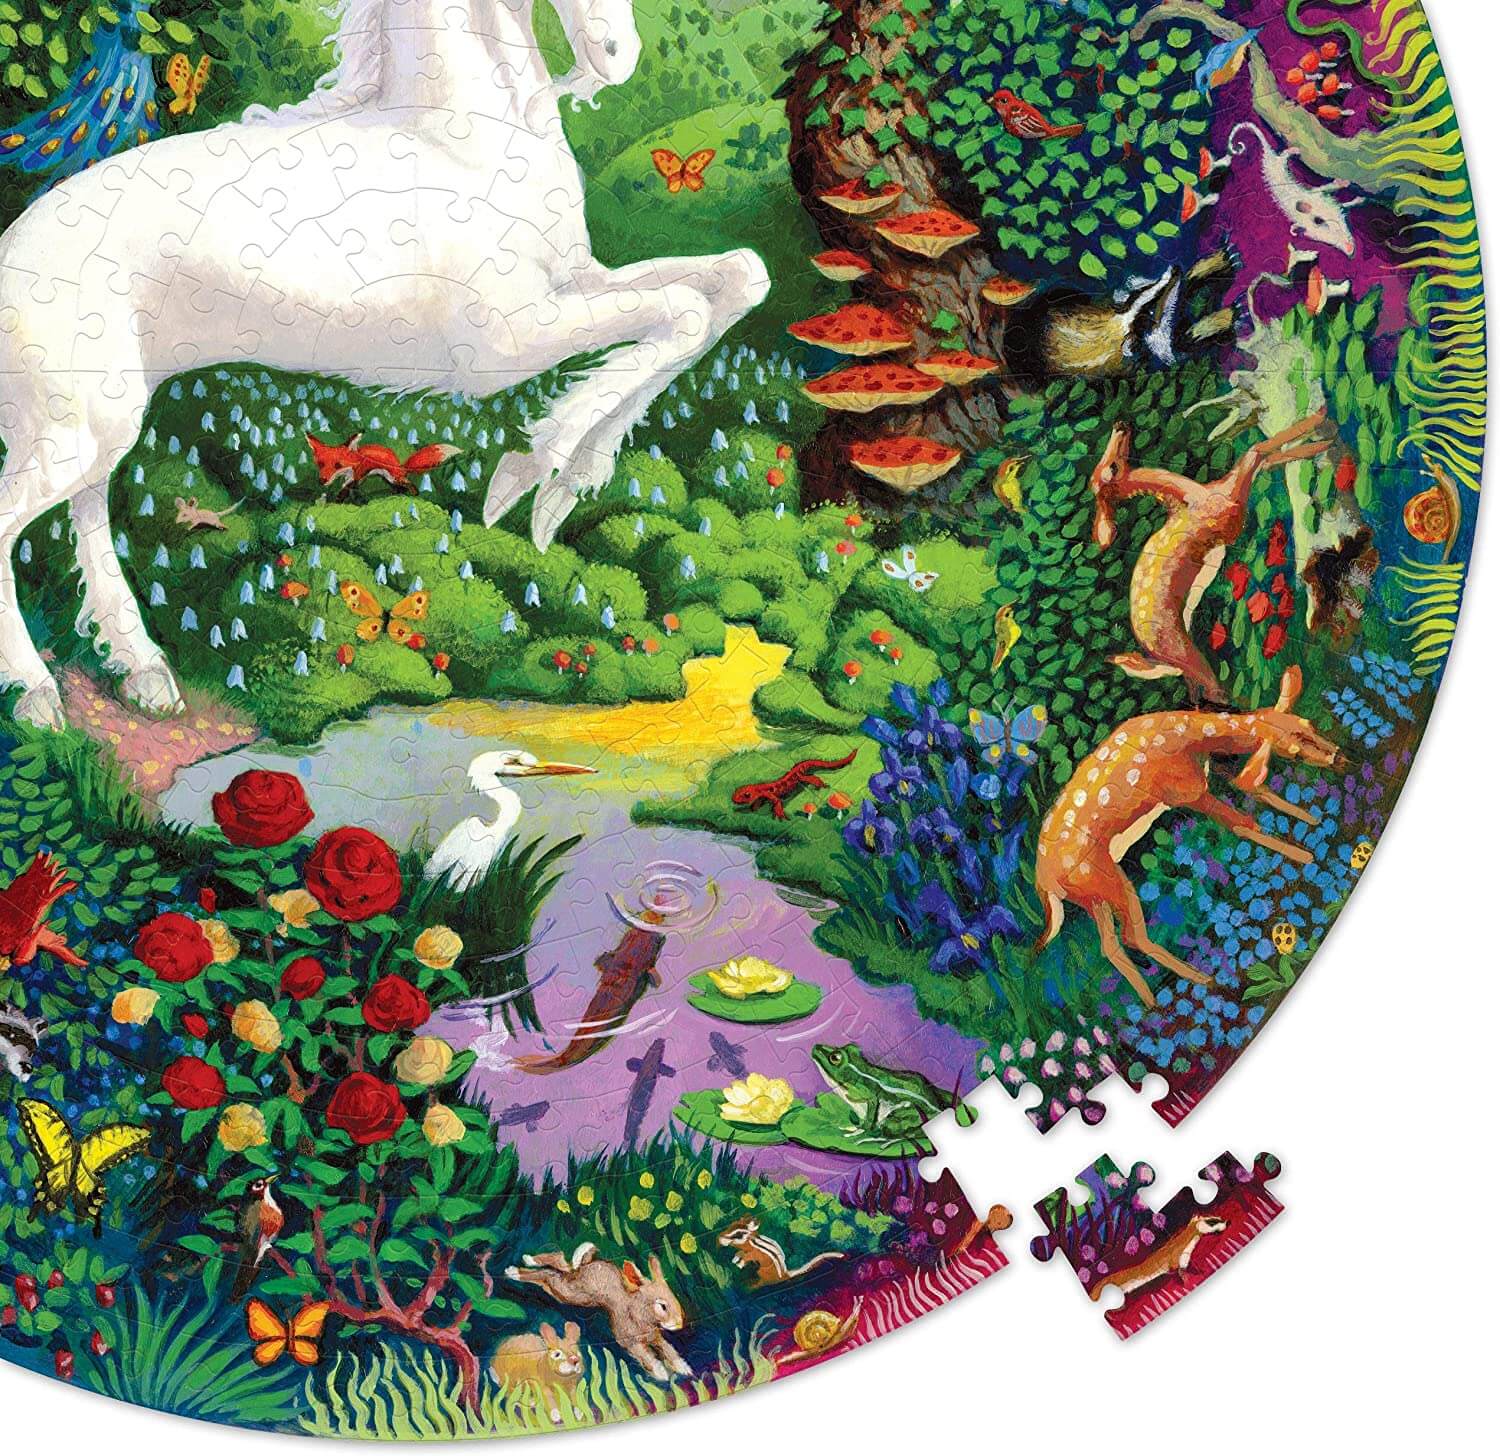 eeBoo - Piece and Love Unicorn Garden 500 Piece Round Circle Jigsaw Puzzle. Detail of puzzle